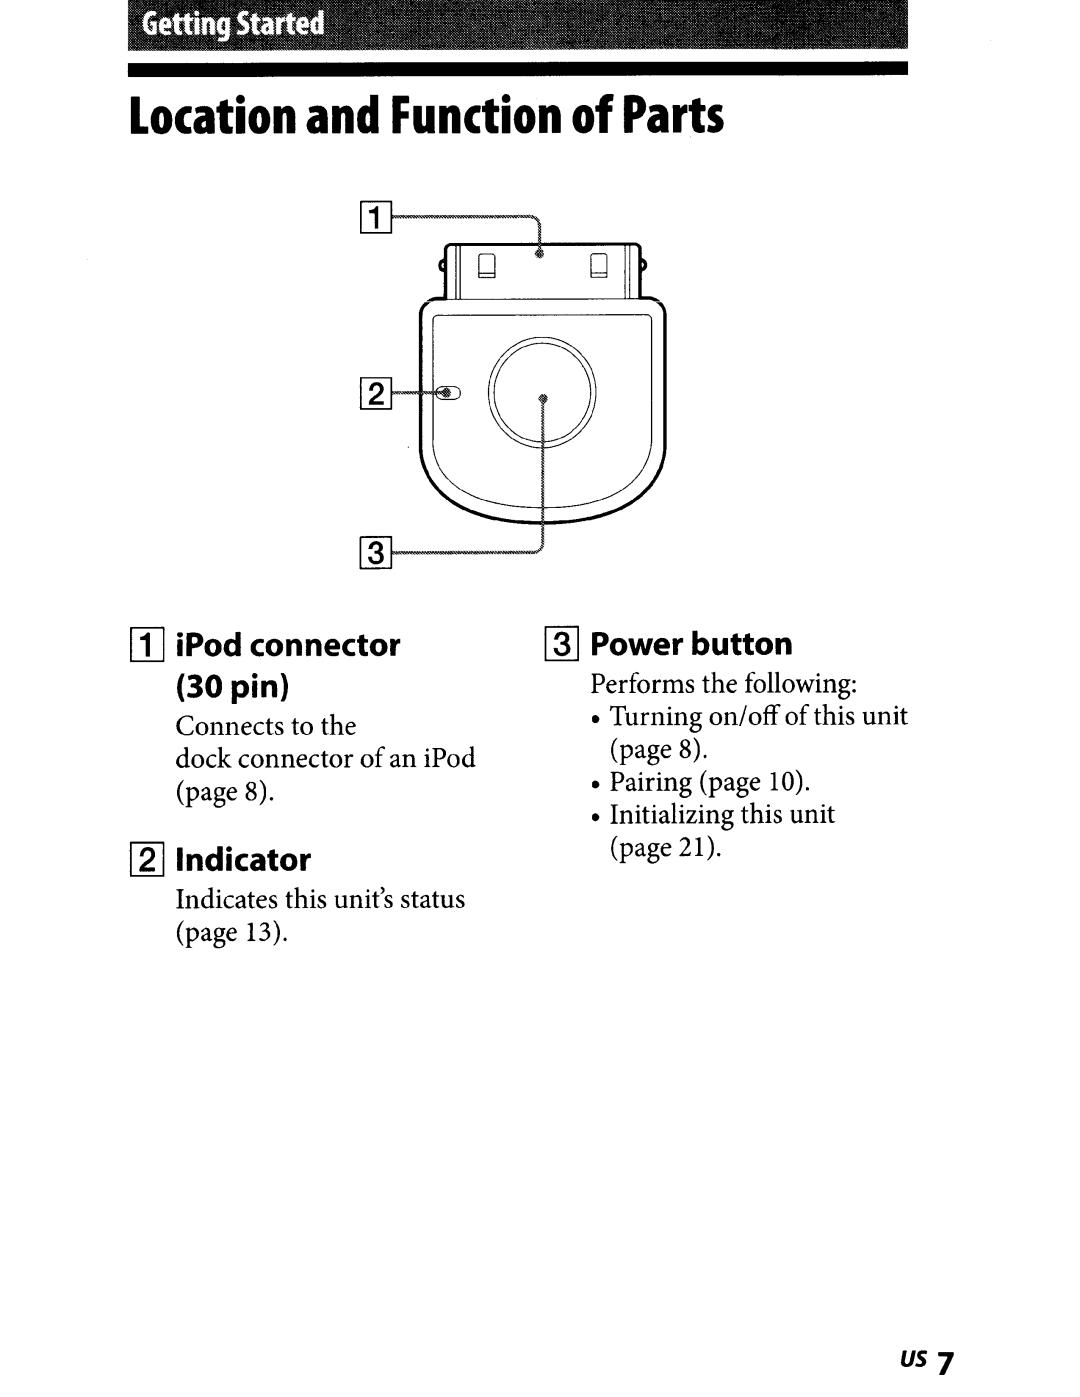 Sony TMR-BT8IP manual Location and Function of Parts, iPod connector, ~ Power button, 30 pin, Indicator 